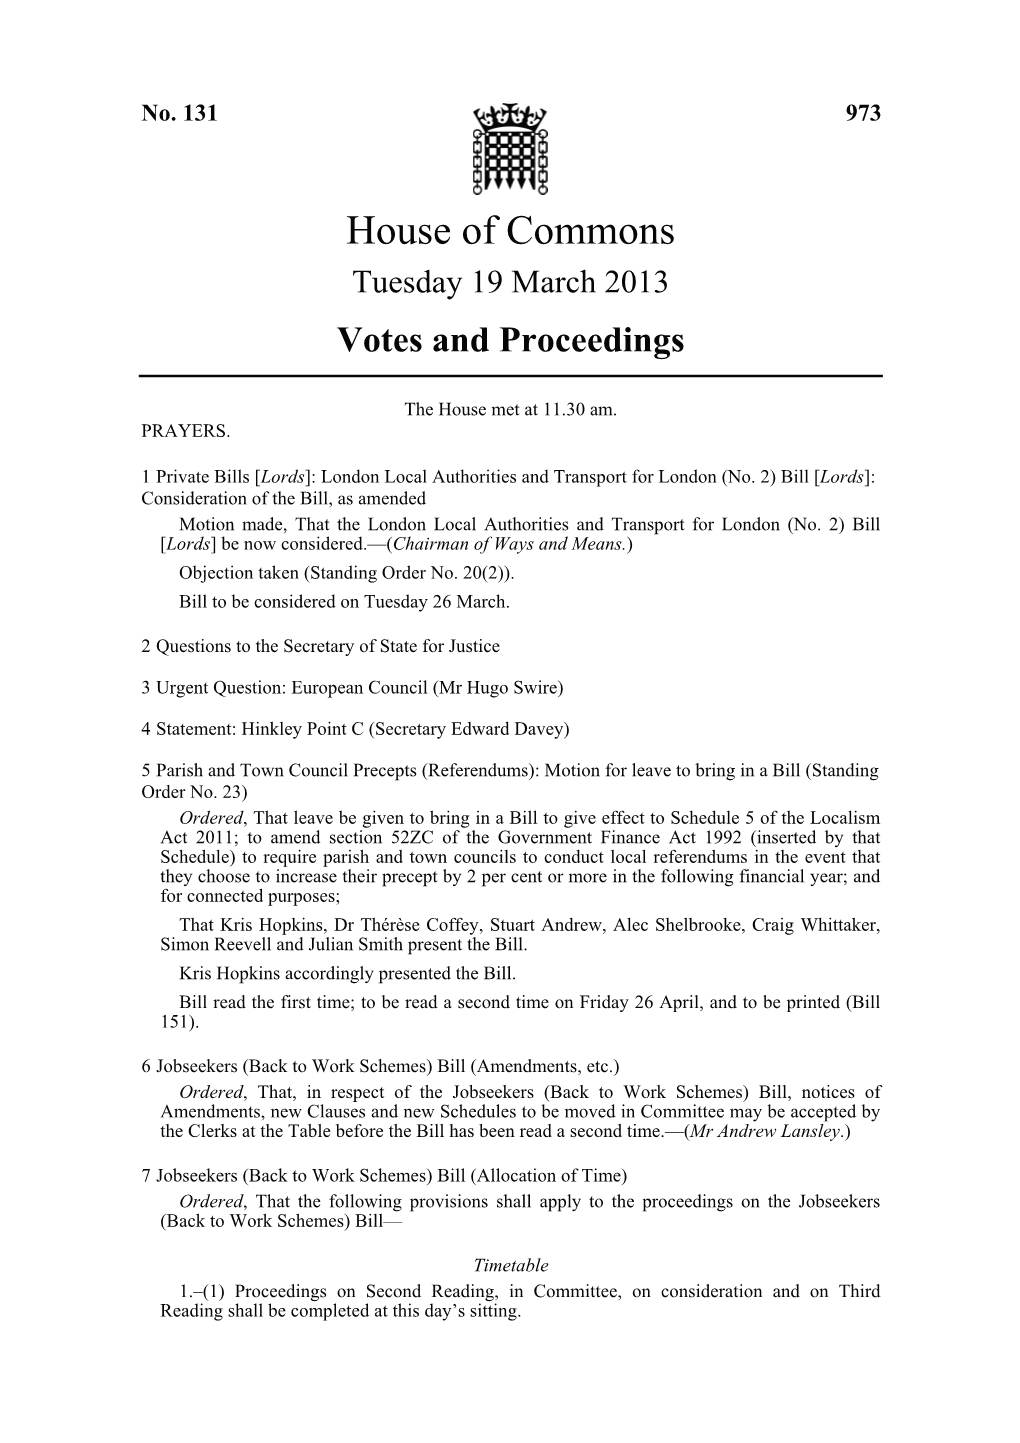 Order of the House of 19 March 2013